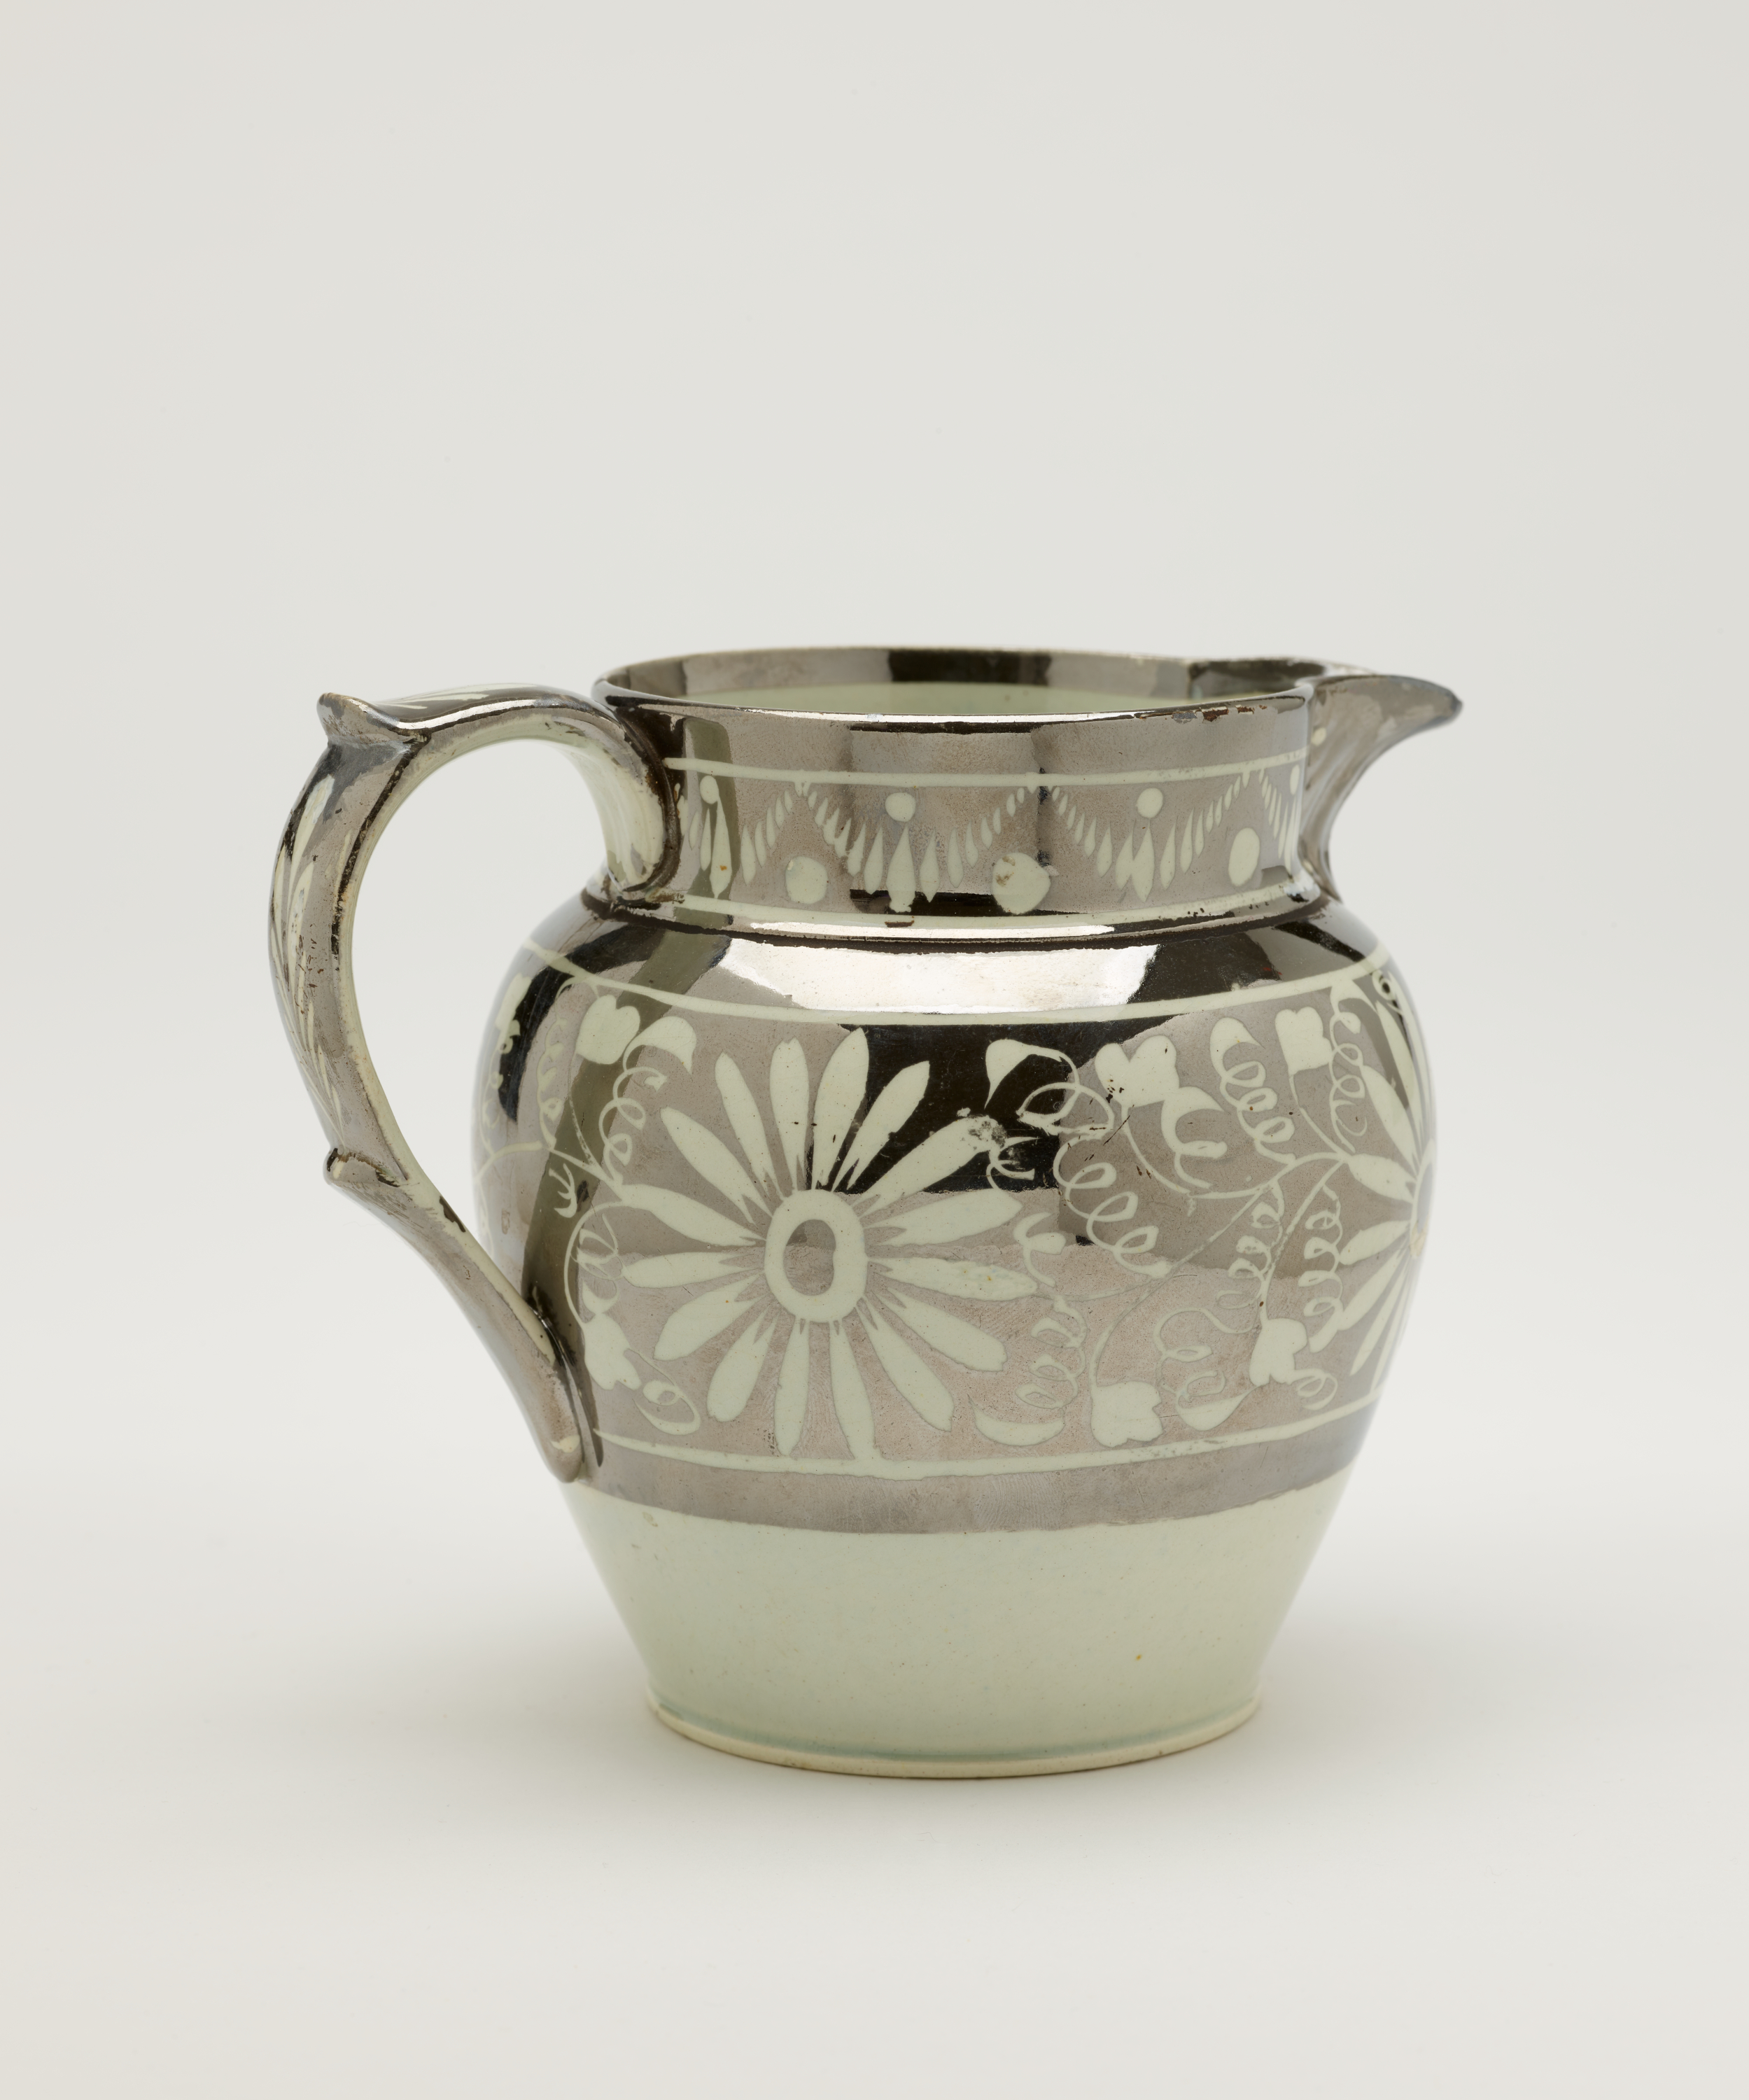 /A%20silver%20ceramic%20jug%20with%20a%20decorative%20handle%2C%20there%20are%20decorative%20floral%20motifs%20on%20the%20body%20of%20the%20vessel.